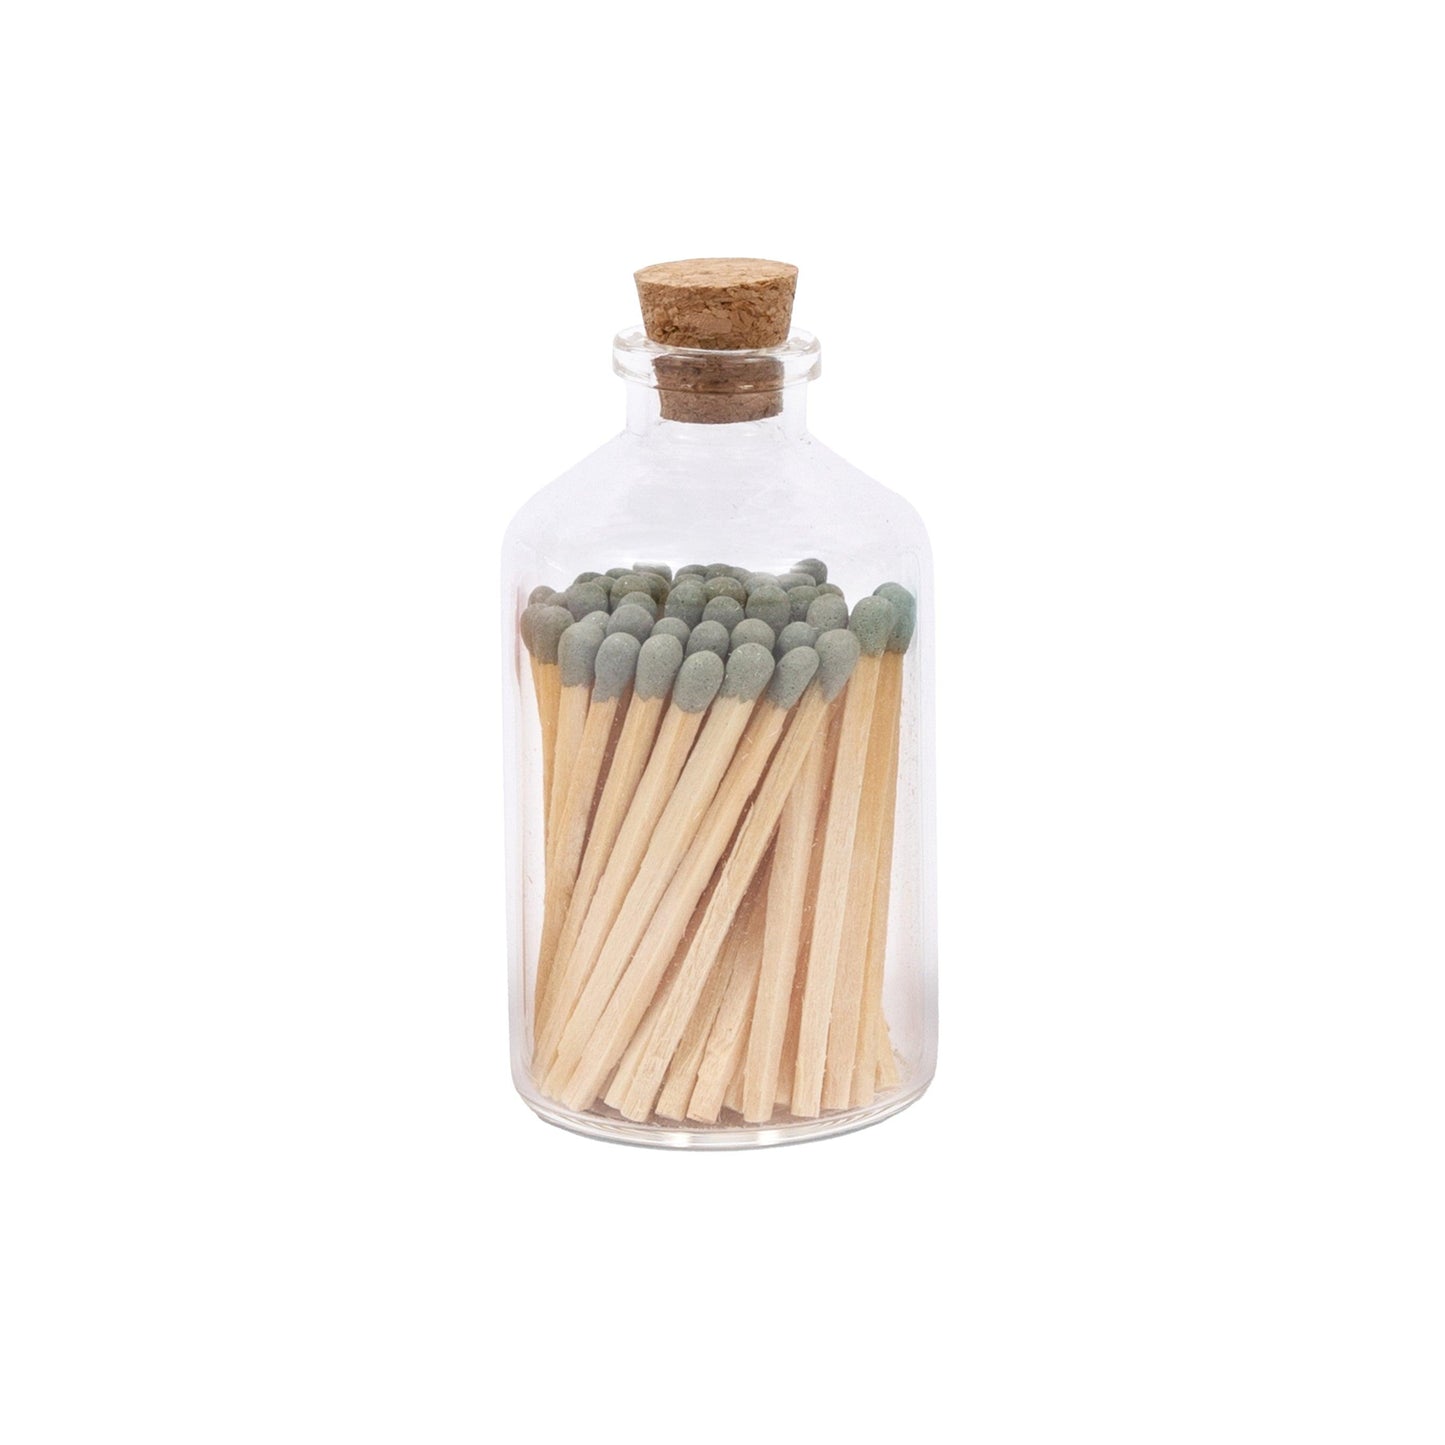 Apothecary Match Glass Jar by Giften Market